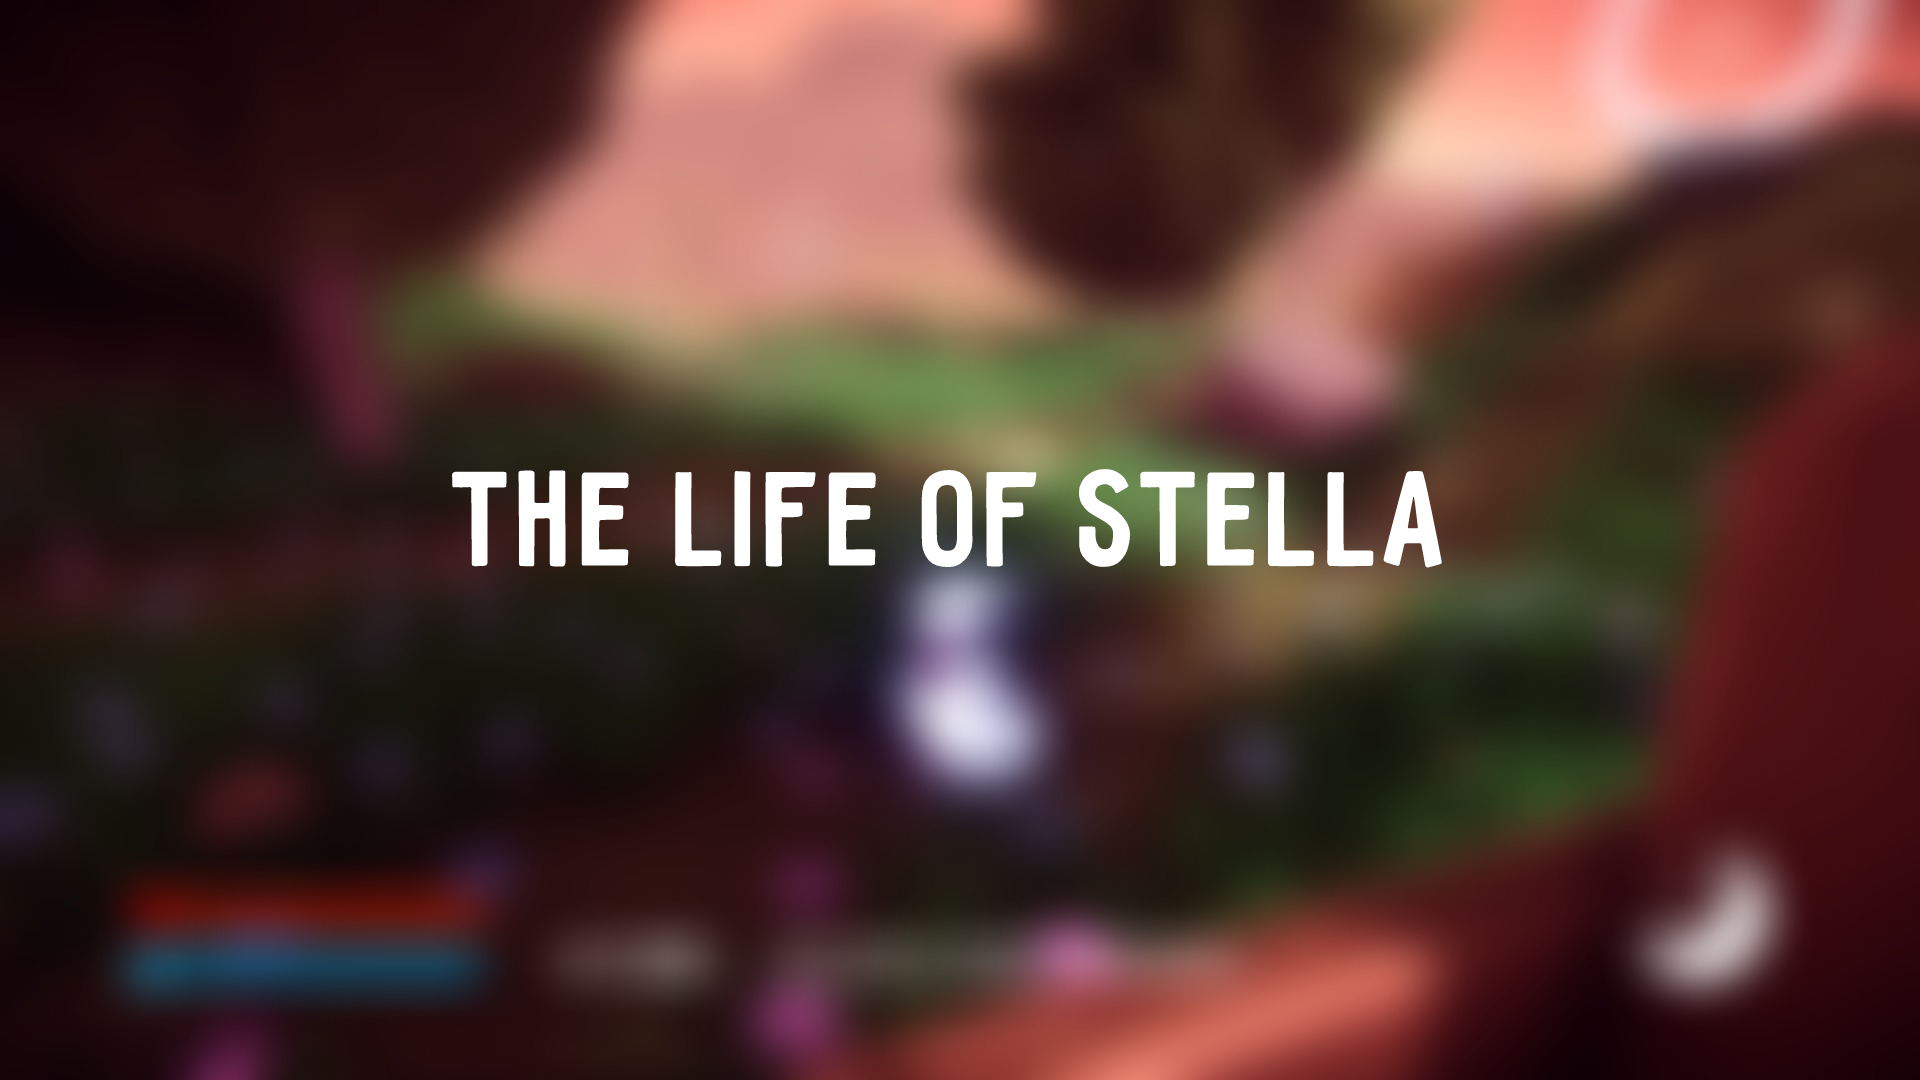 THE LIFE OF STELLA